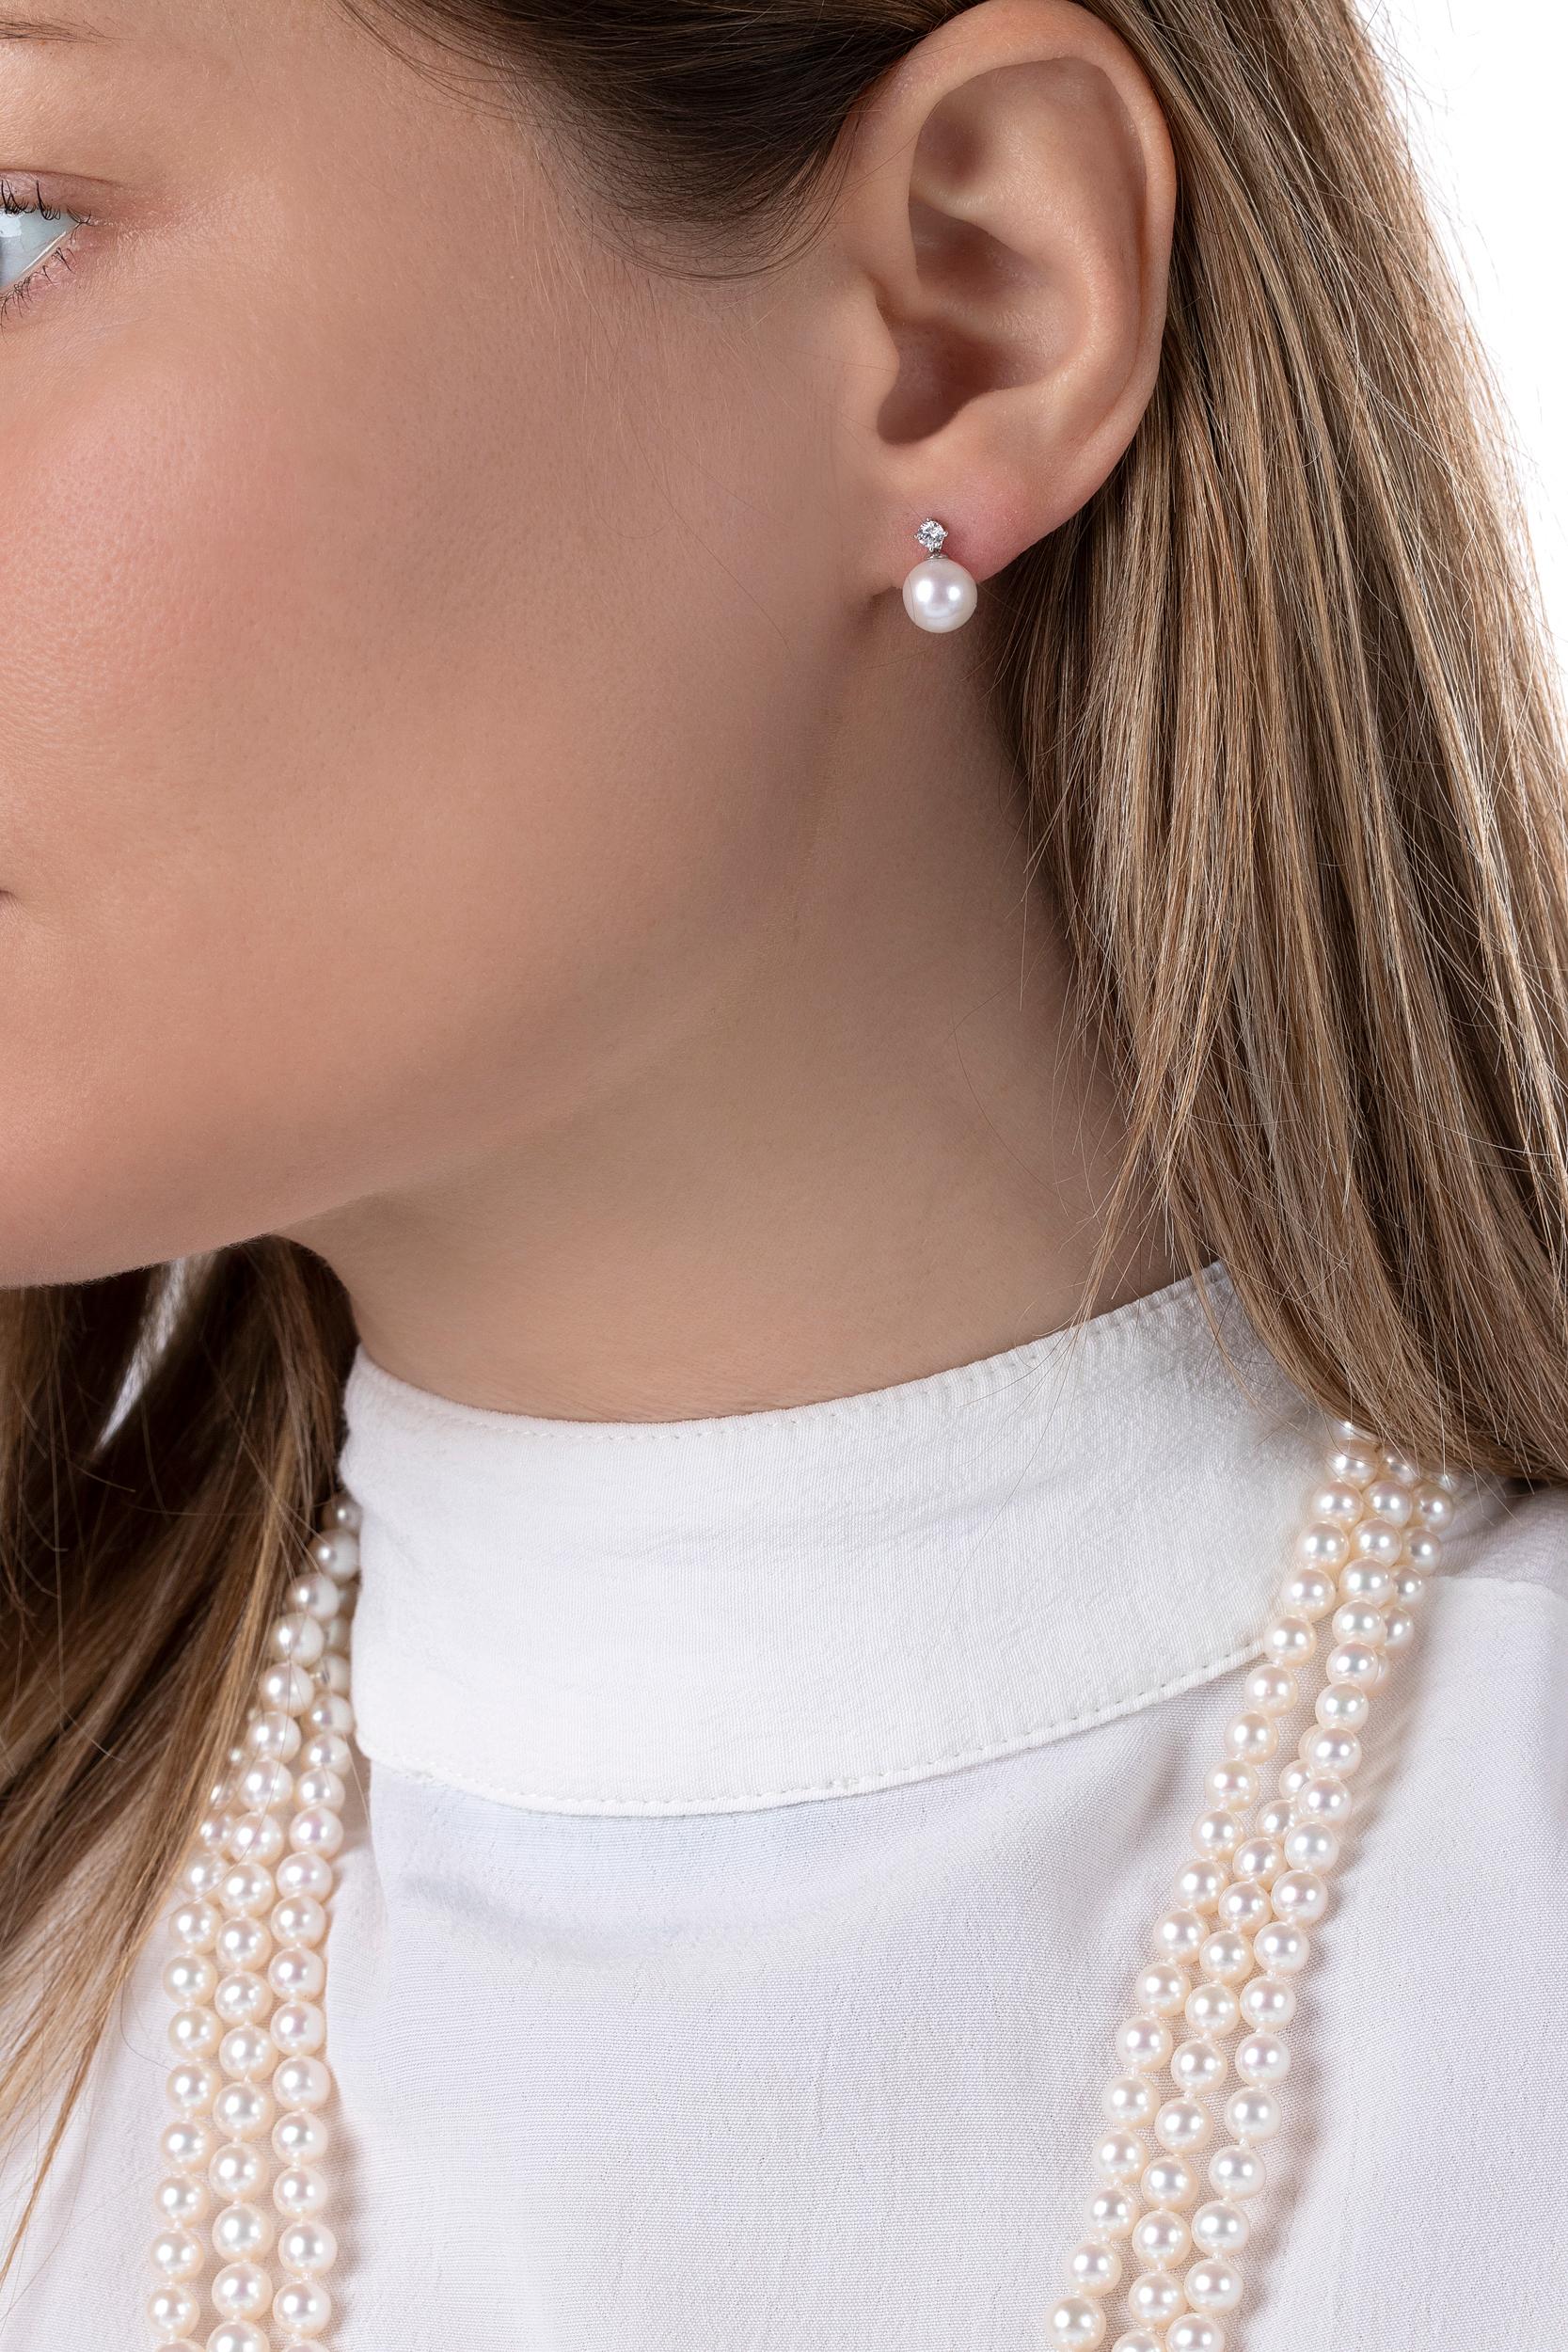 Yoko London's Classic collection is comprised of timeless pieces that would make a spectacular addition to any jewellery box; with each piece designed to last through the generations. Featuring a lustrous 8-8.5mm Freshwater pearl suspended beneath a